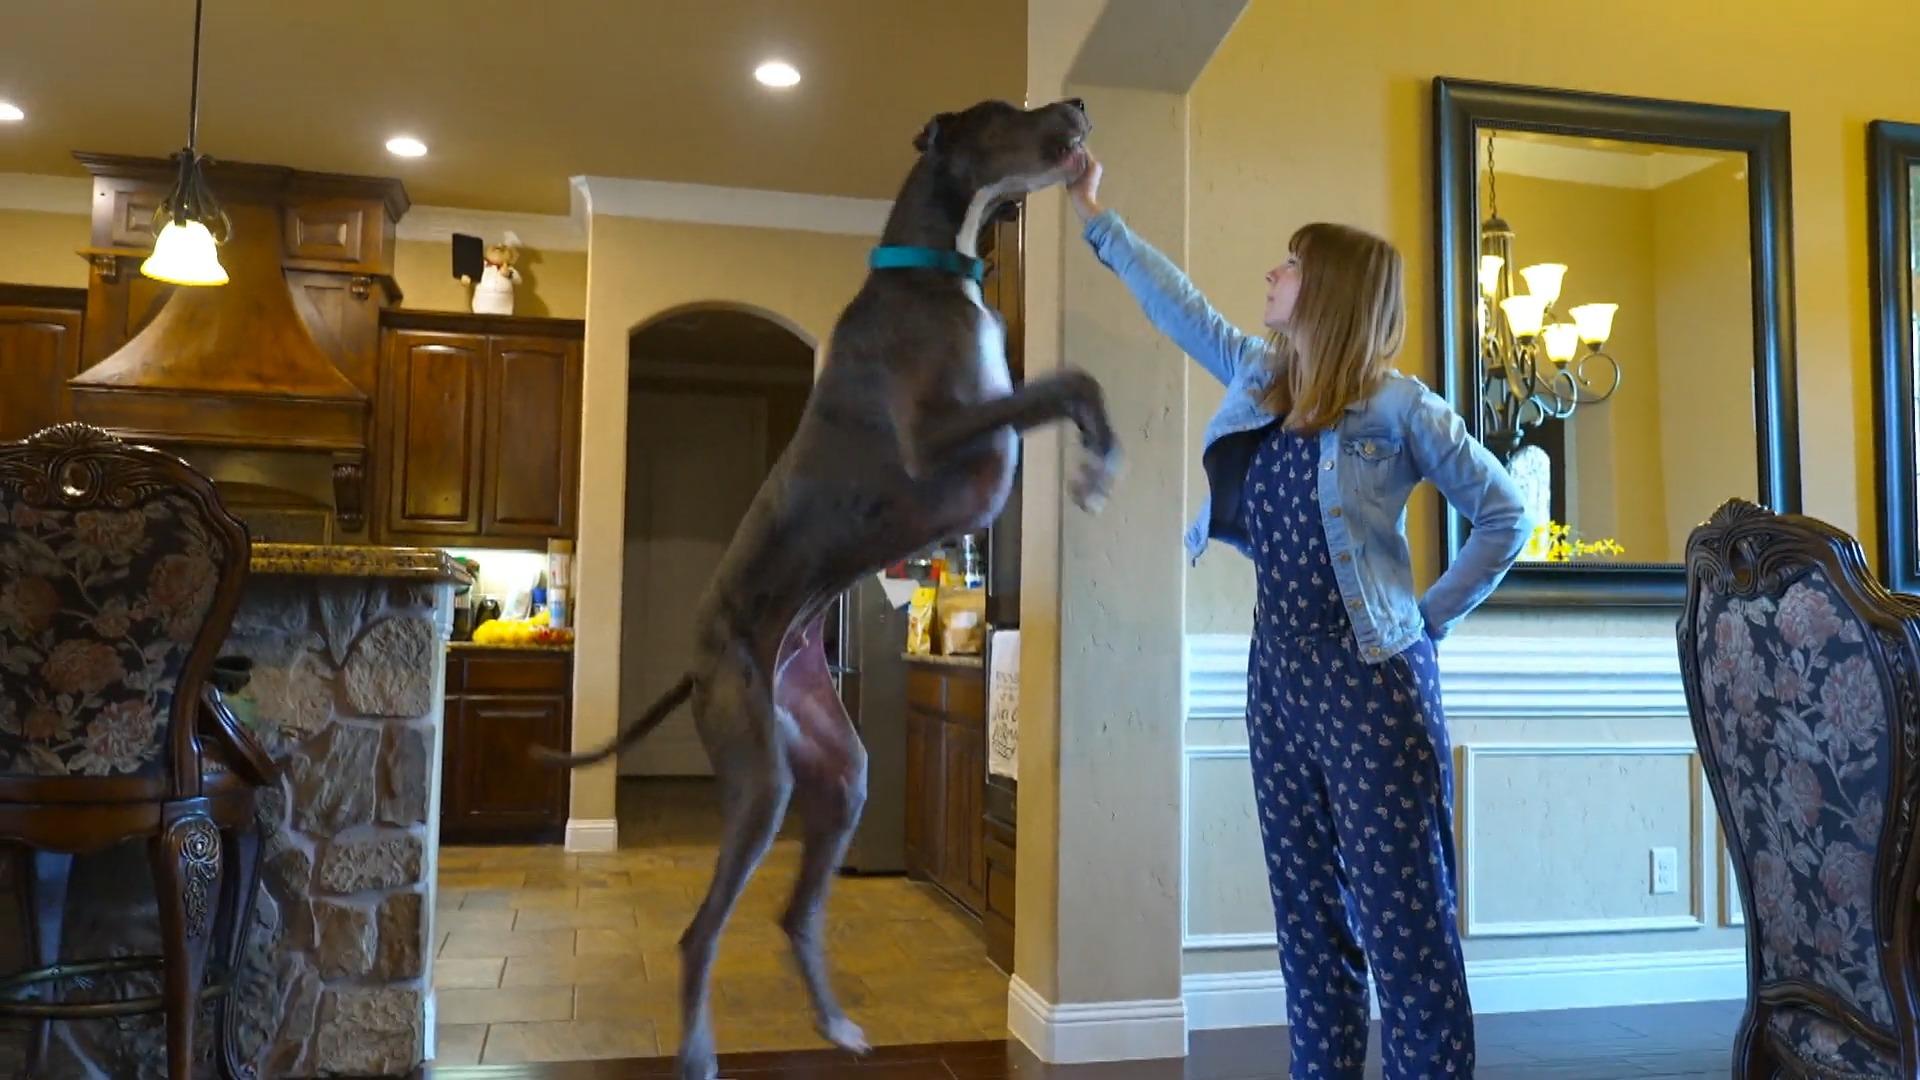 The Great Dane Zeus is the world's largest four-legged dog